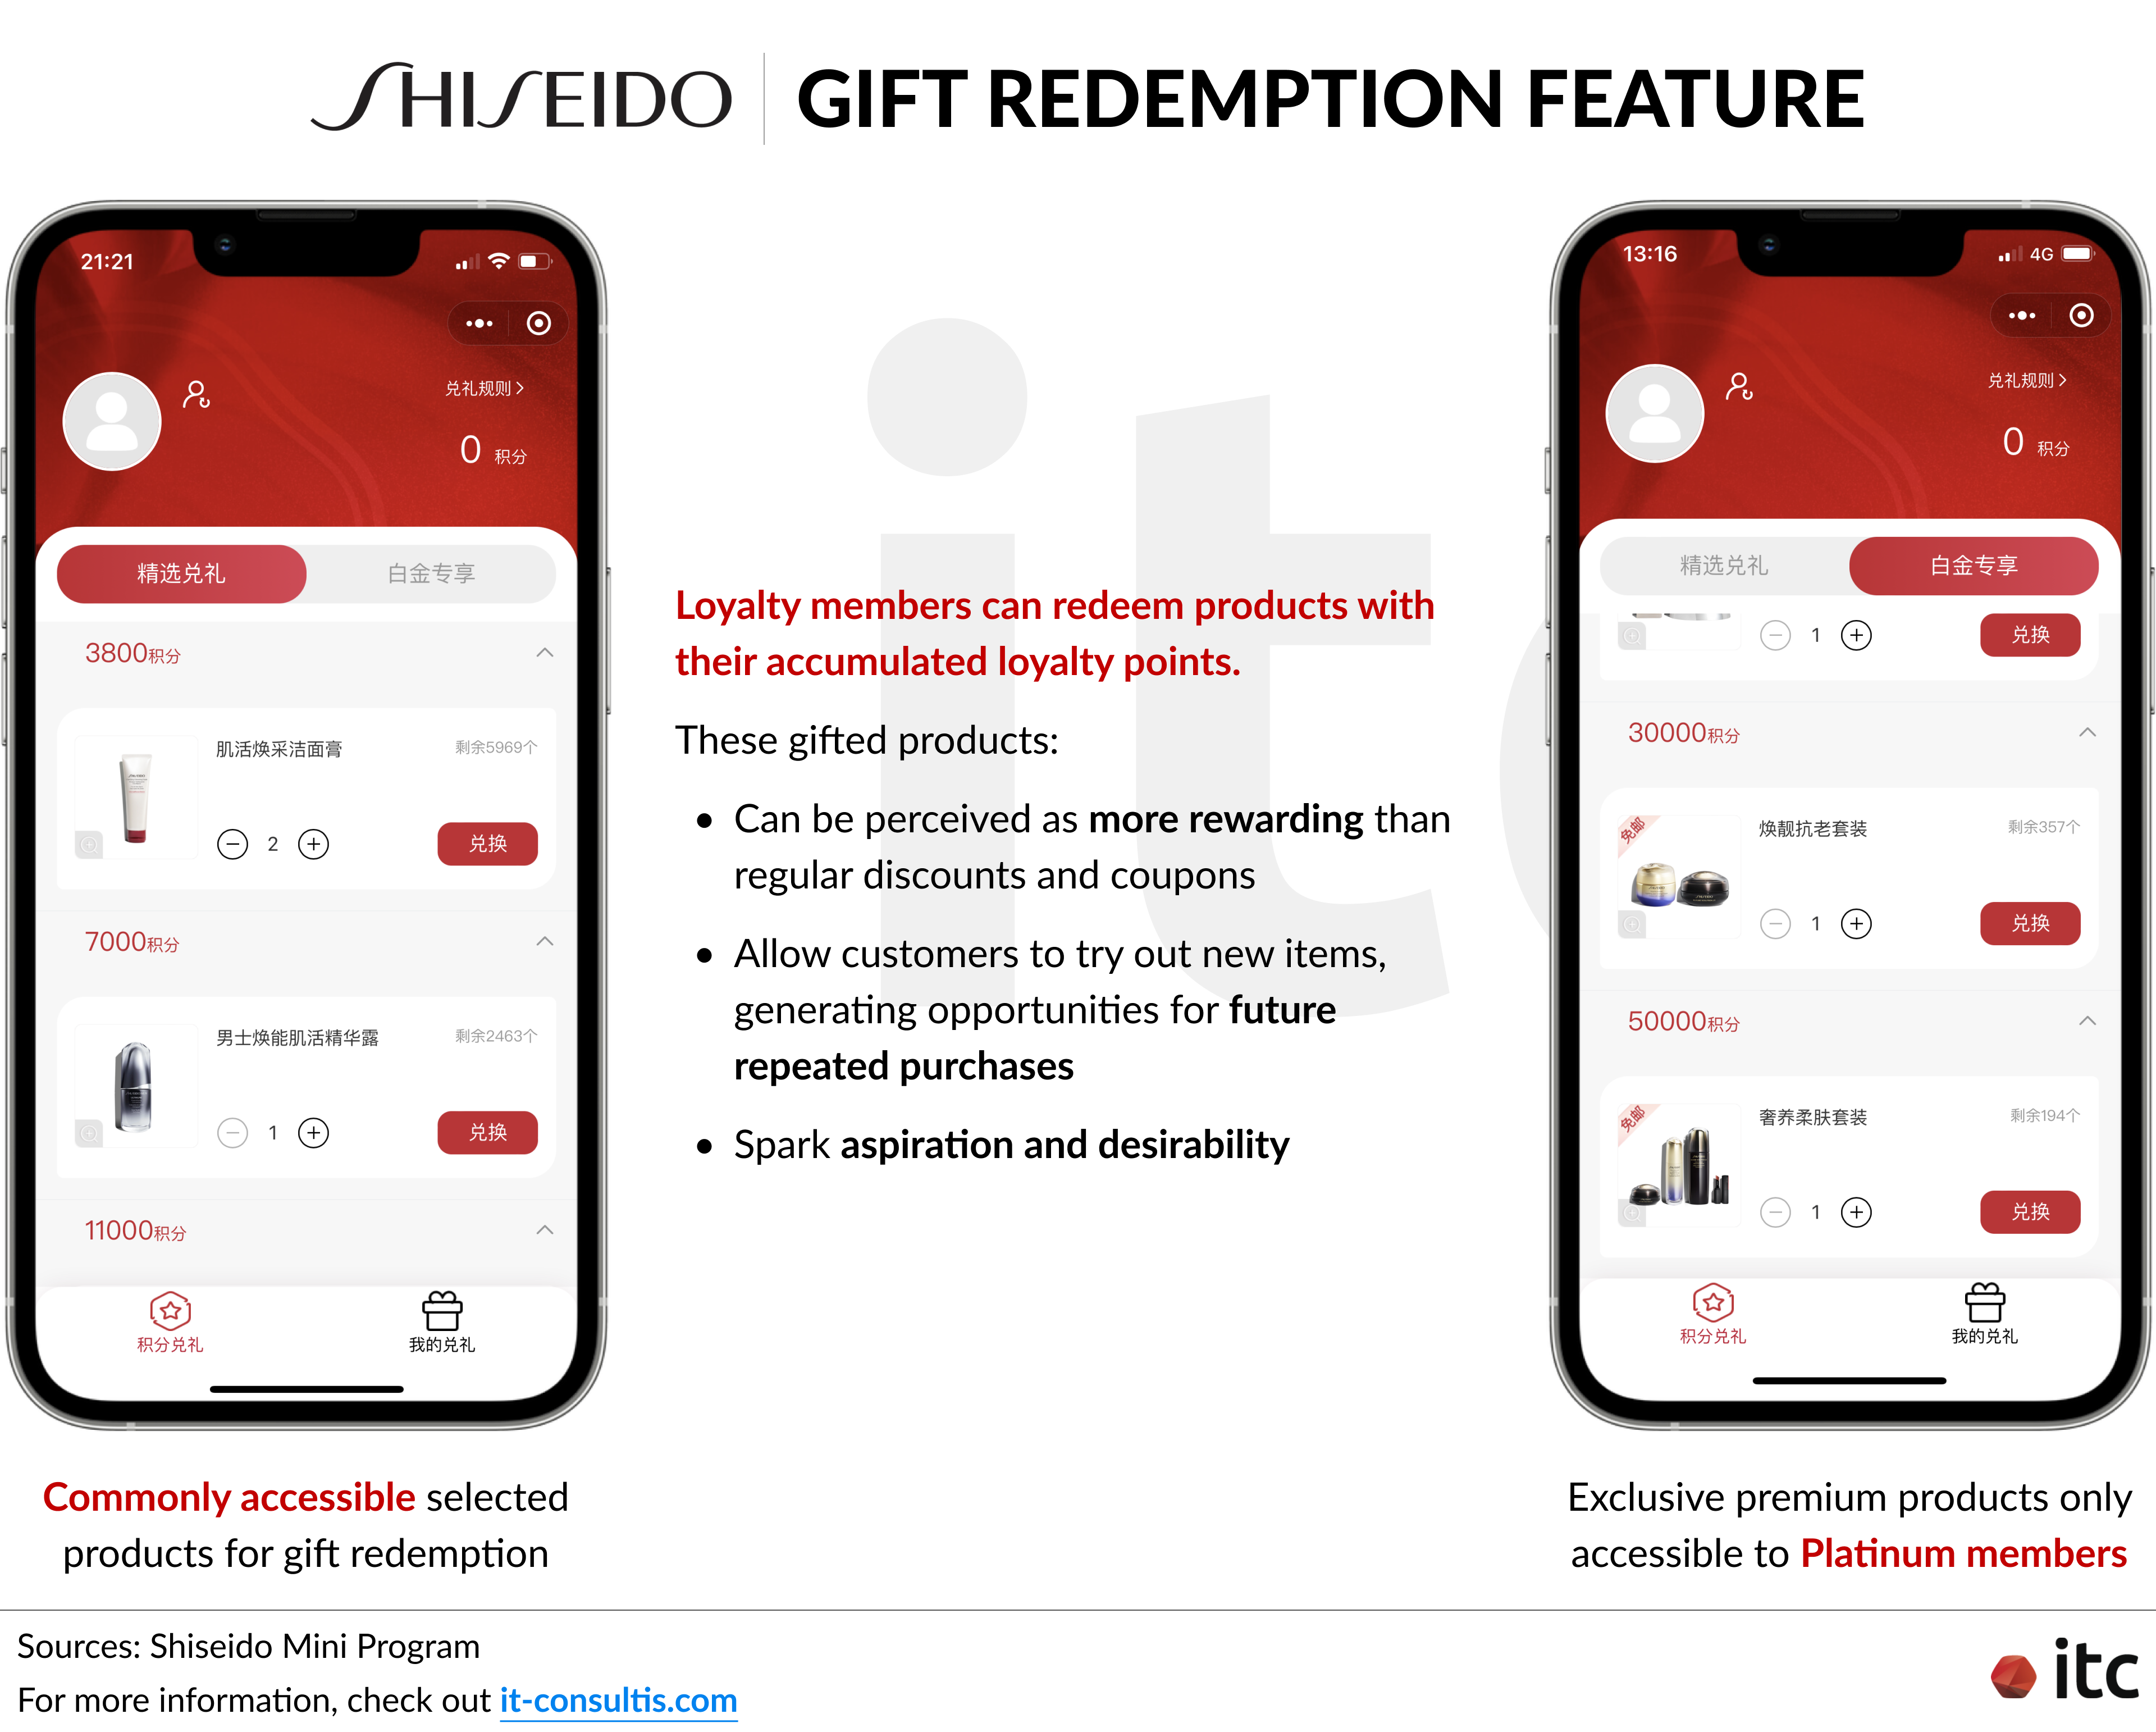 Shiseido also features a Gift Redemption function in its loyalty program strategy on WeChat